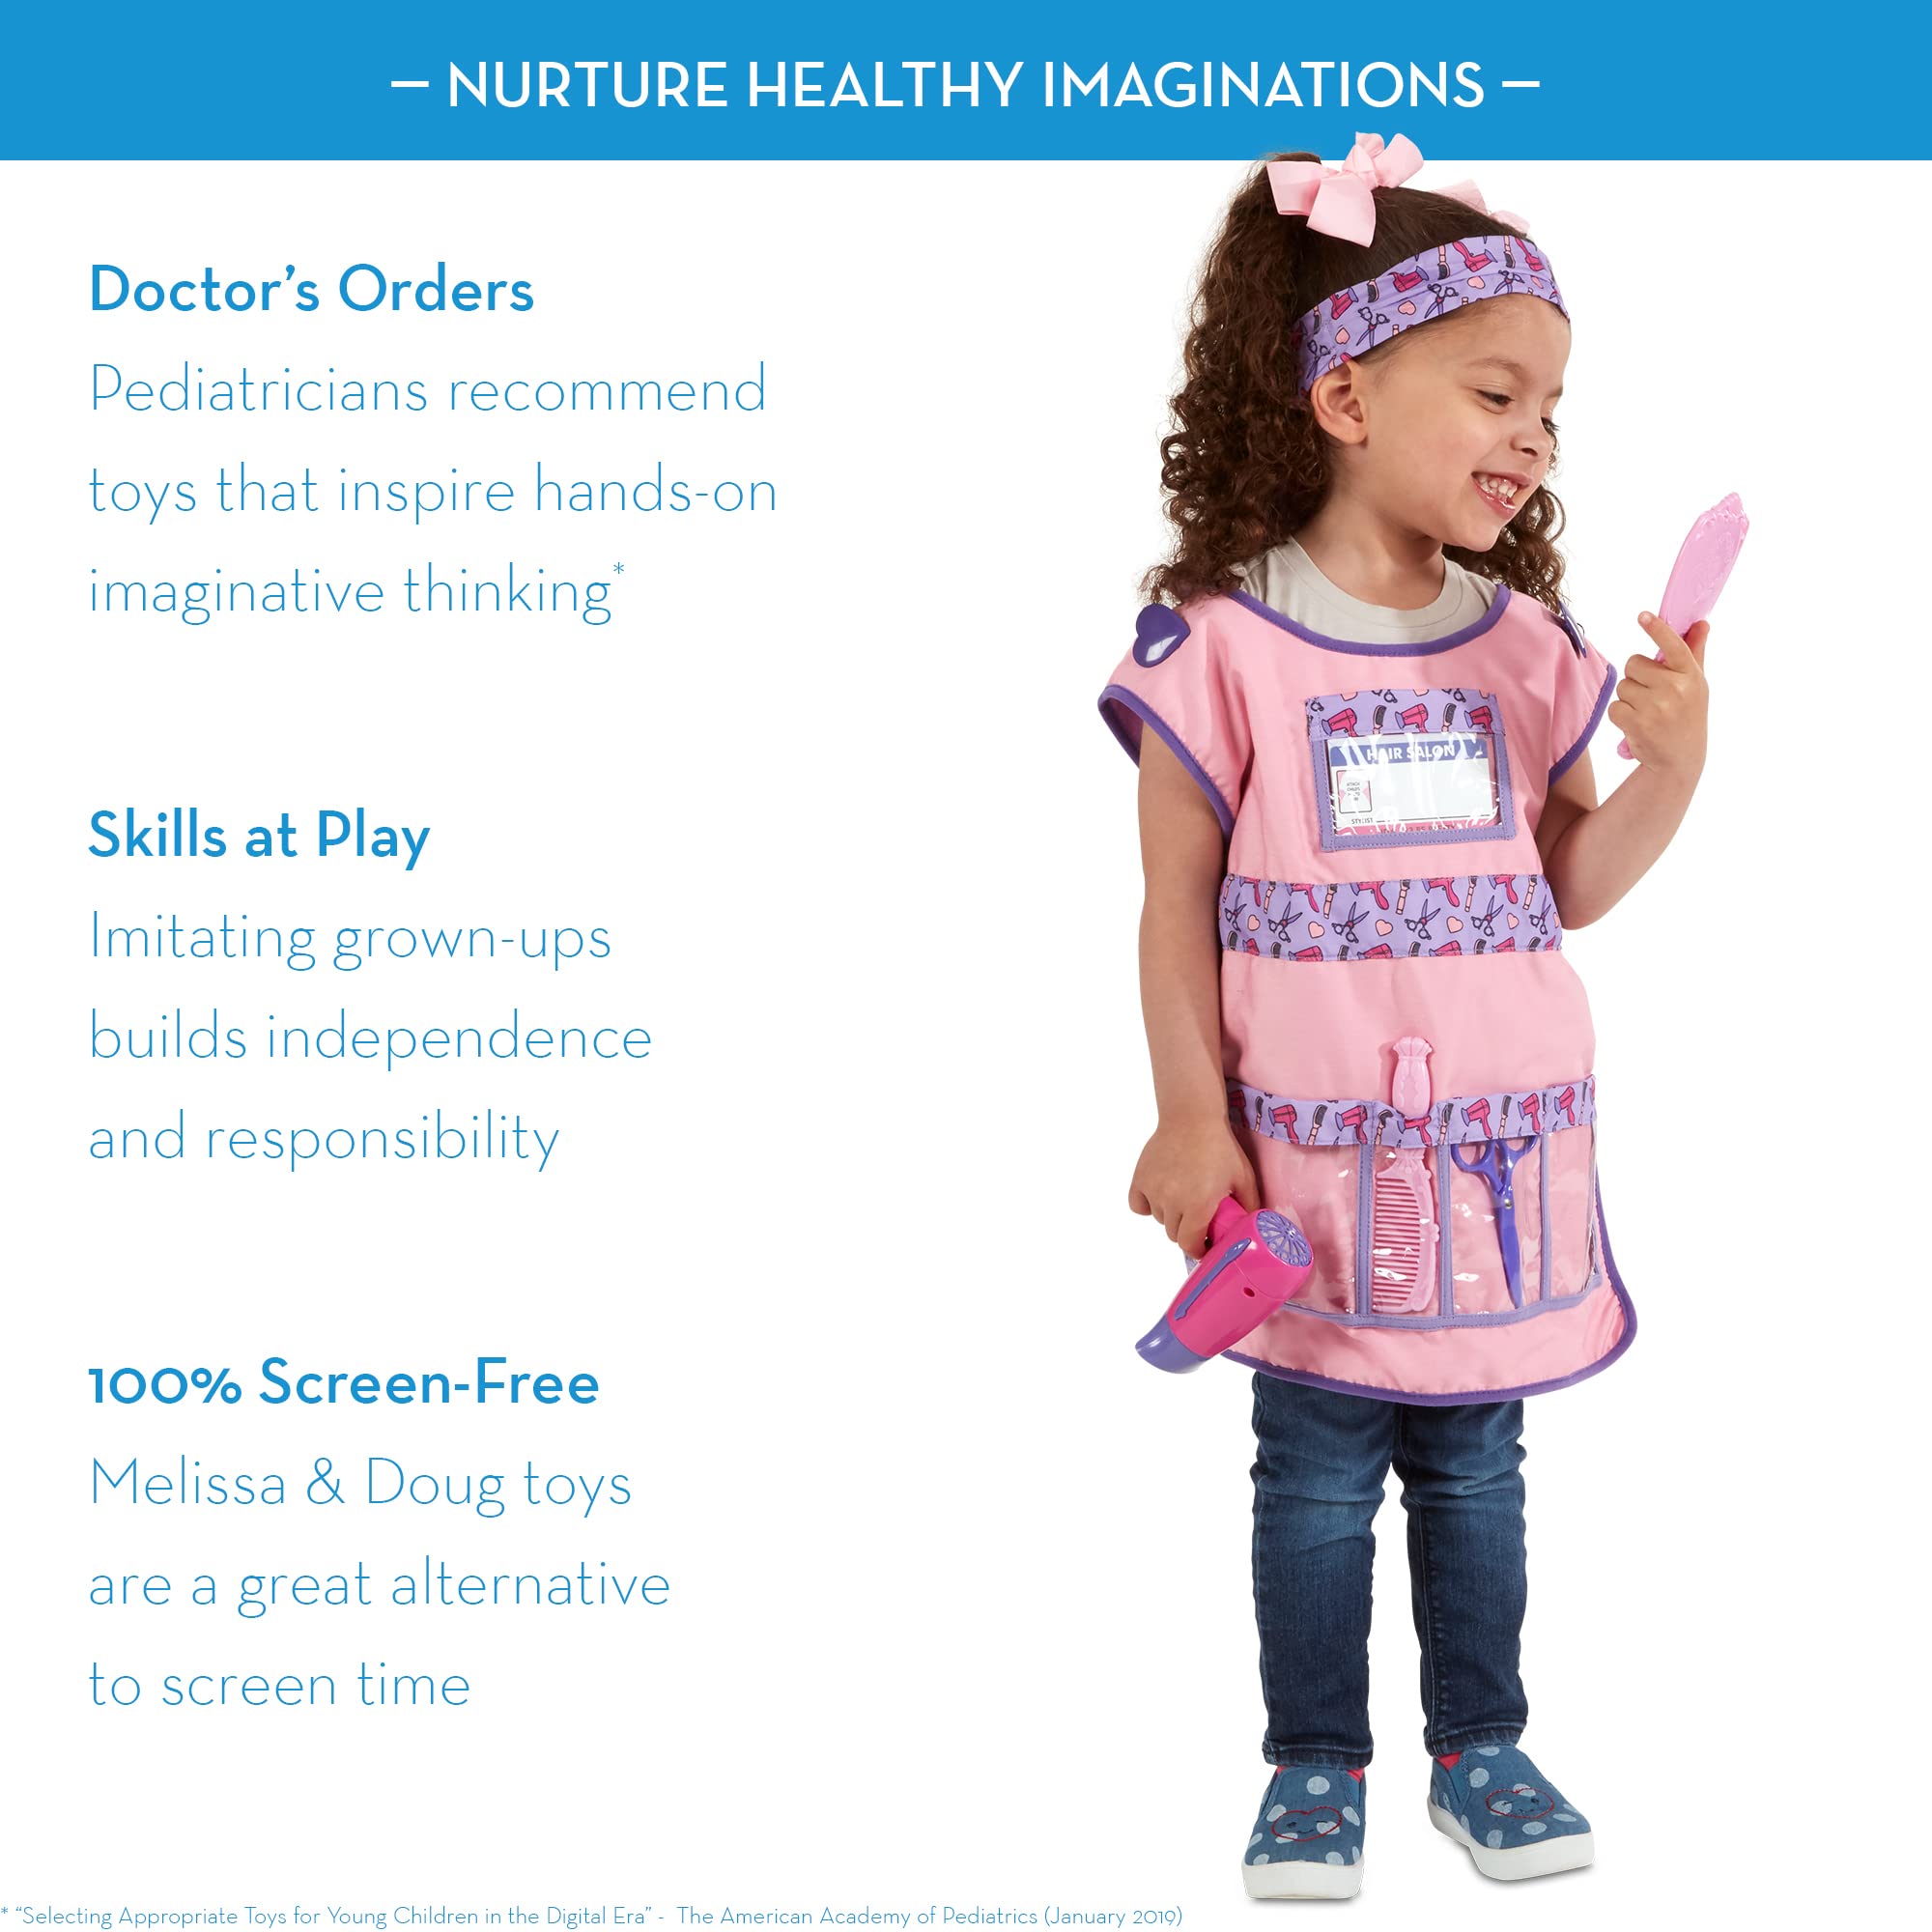 Melissa & Doug Hair Stylist Role Play Costume Dress-Up Set (Frustration-Free Packaging)